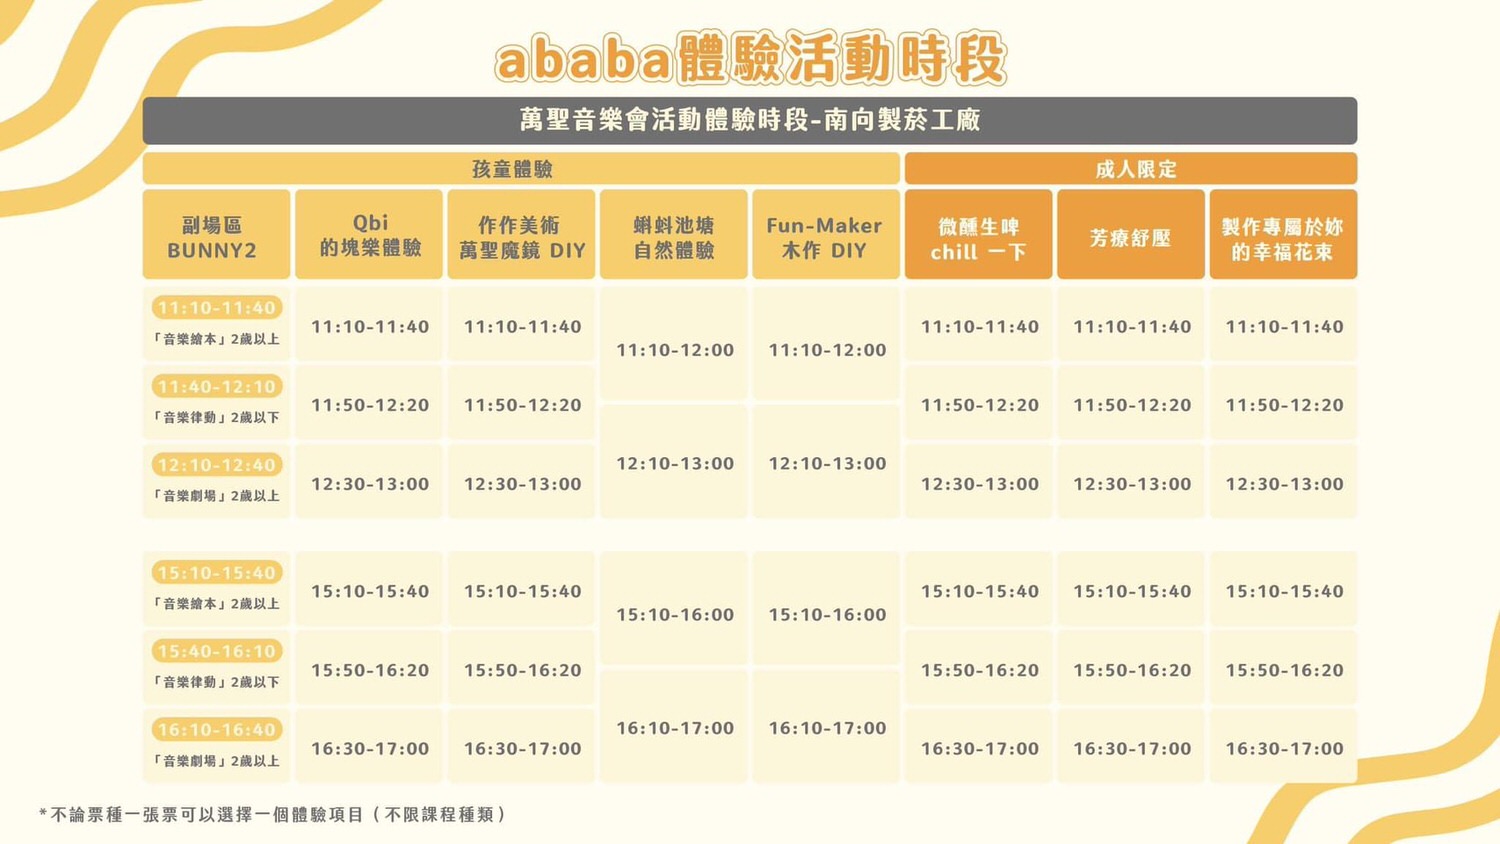 ababa星球派對芳療紓壓體驗